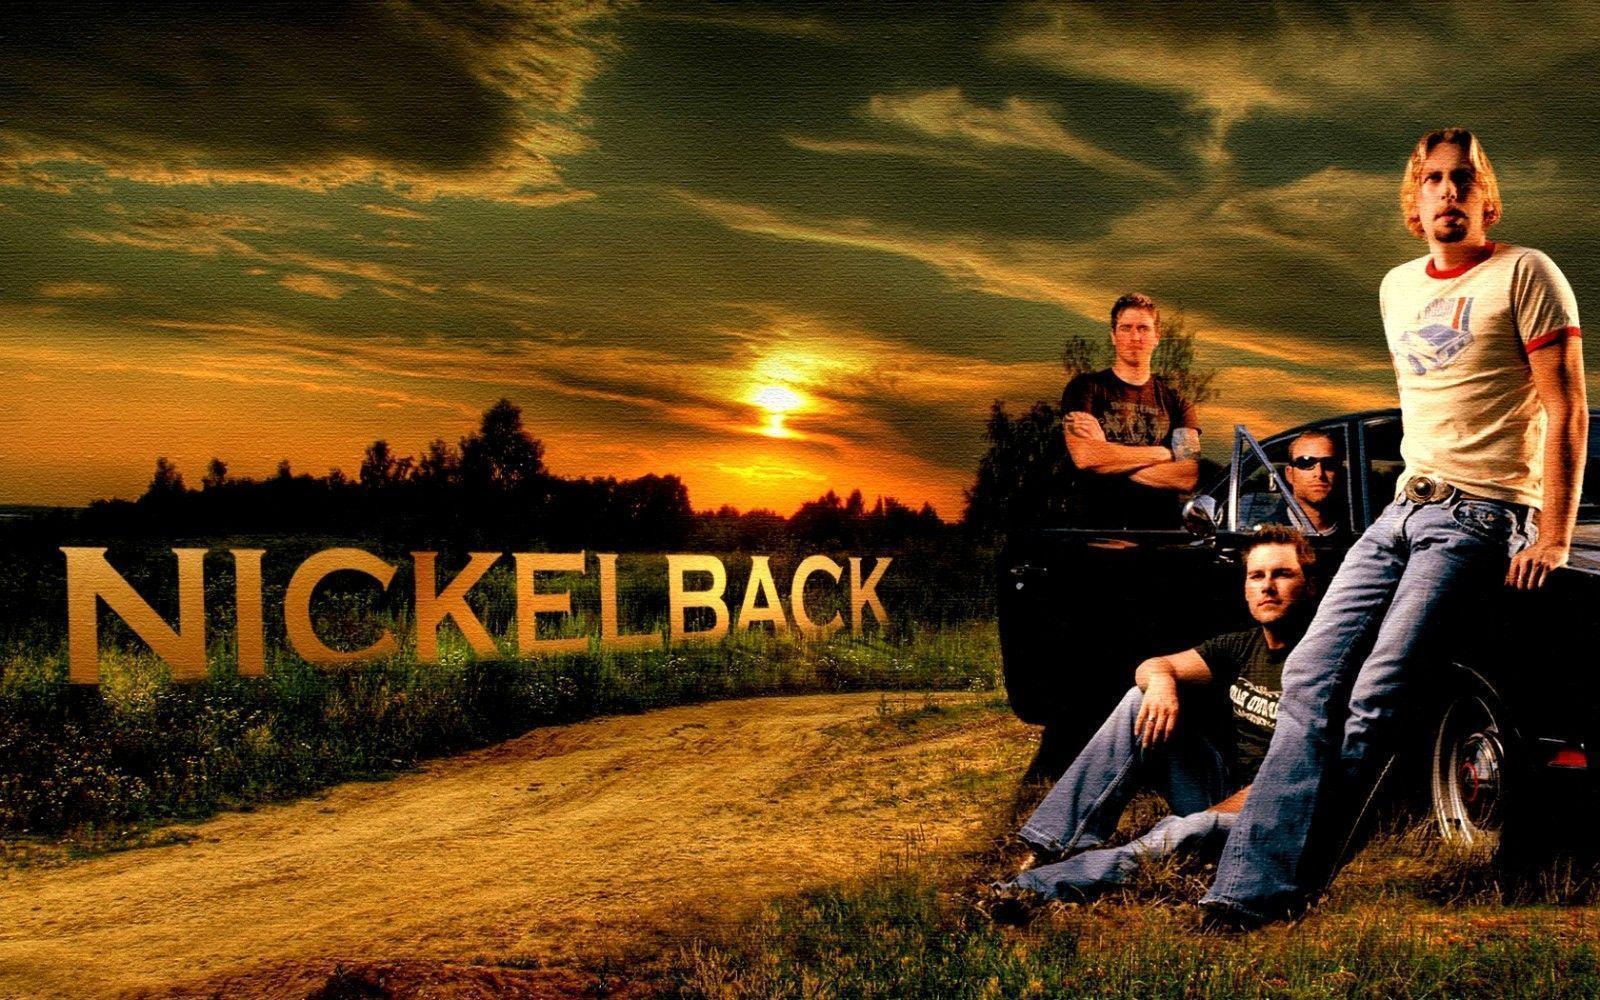 nickelback wallpaper 7 - Image And Wallpaper free to